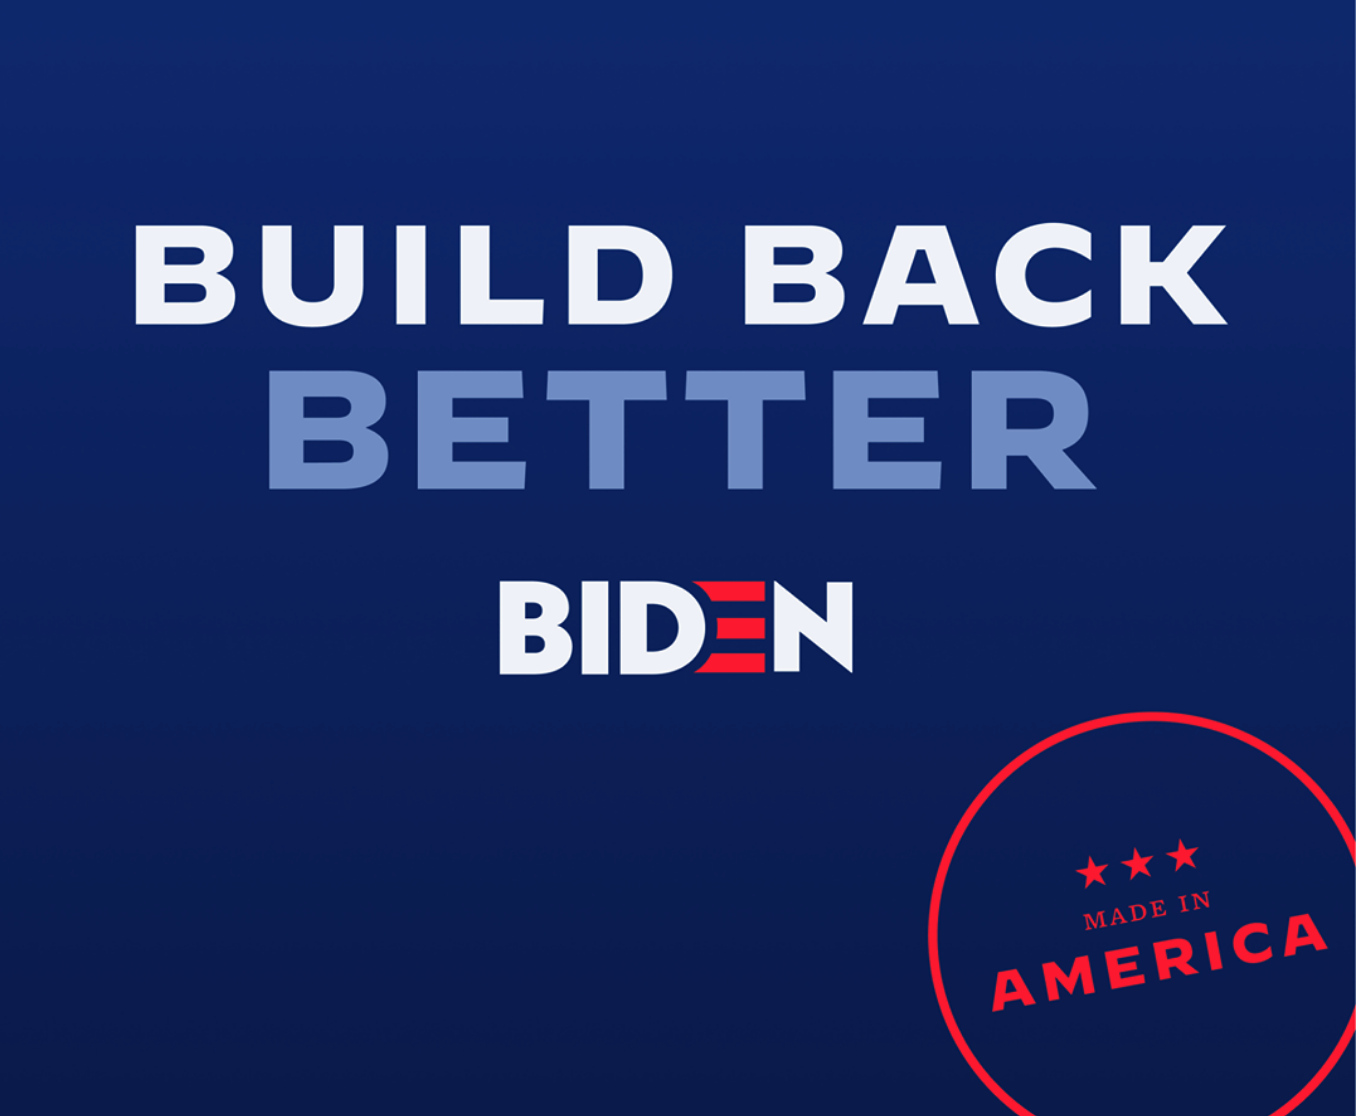 Was Joe Biden’s new campaign slogan “Build Back Better” actually plagiarized from somewhere else?